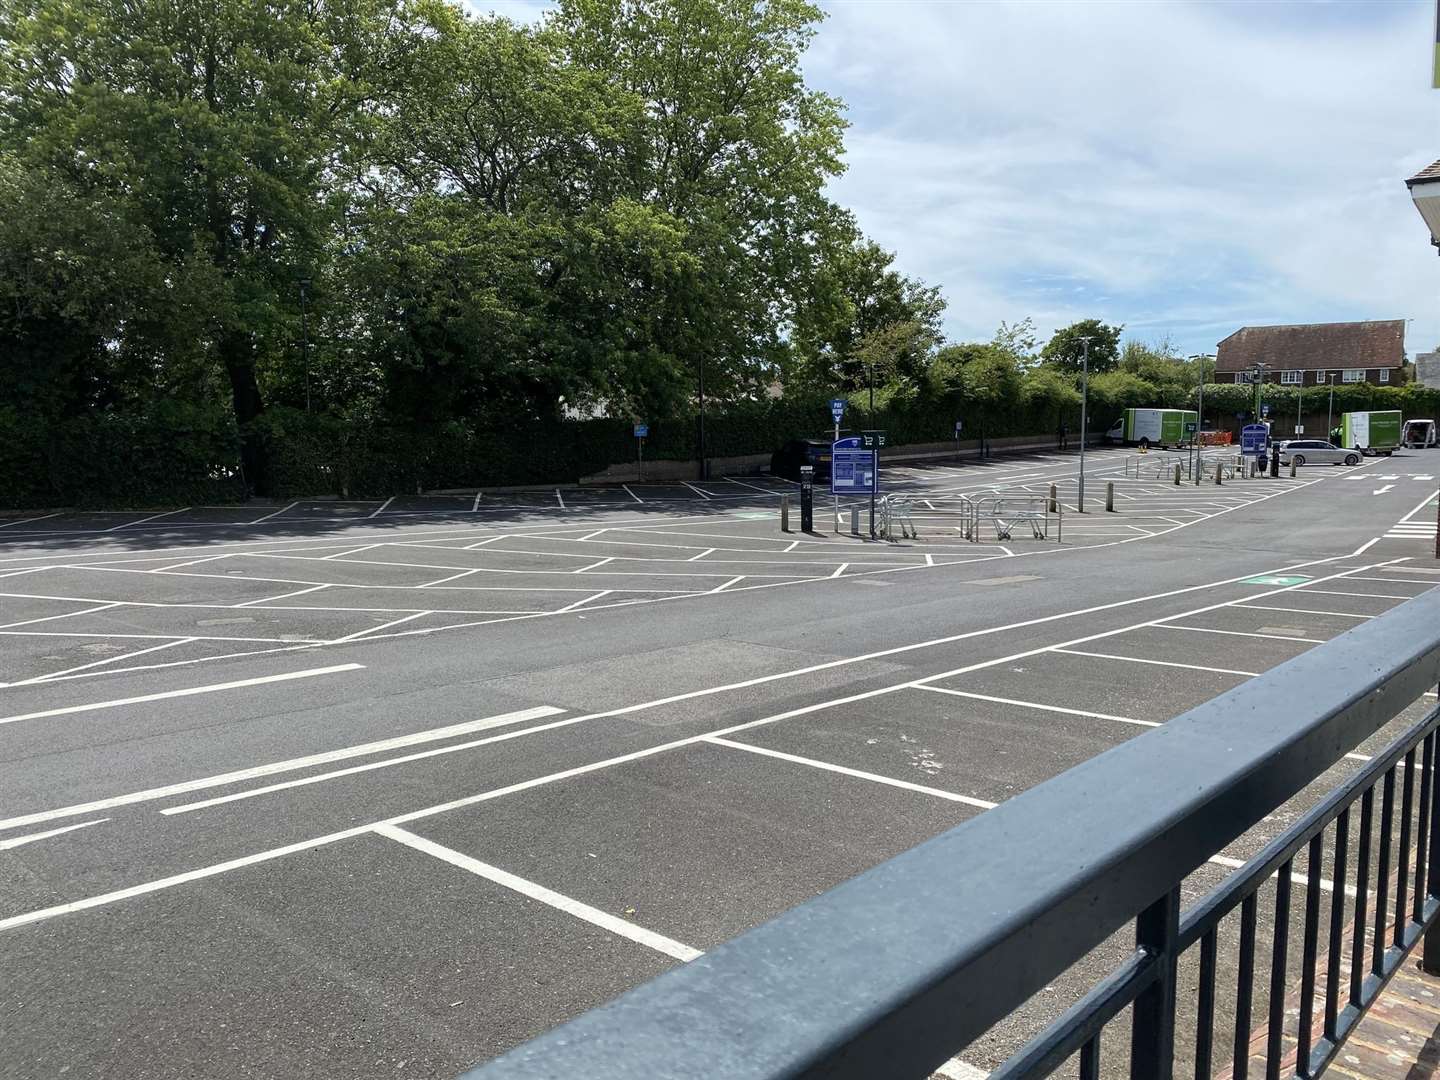 The car park behind Waitrose was almost completely empty on Tuesday. Photo: Sue Ferguson